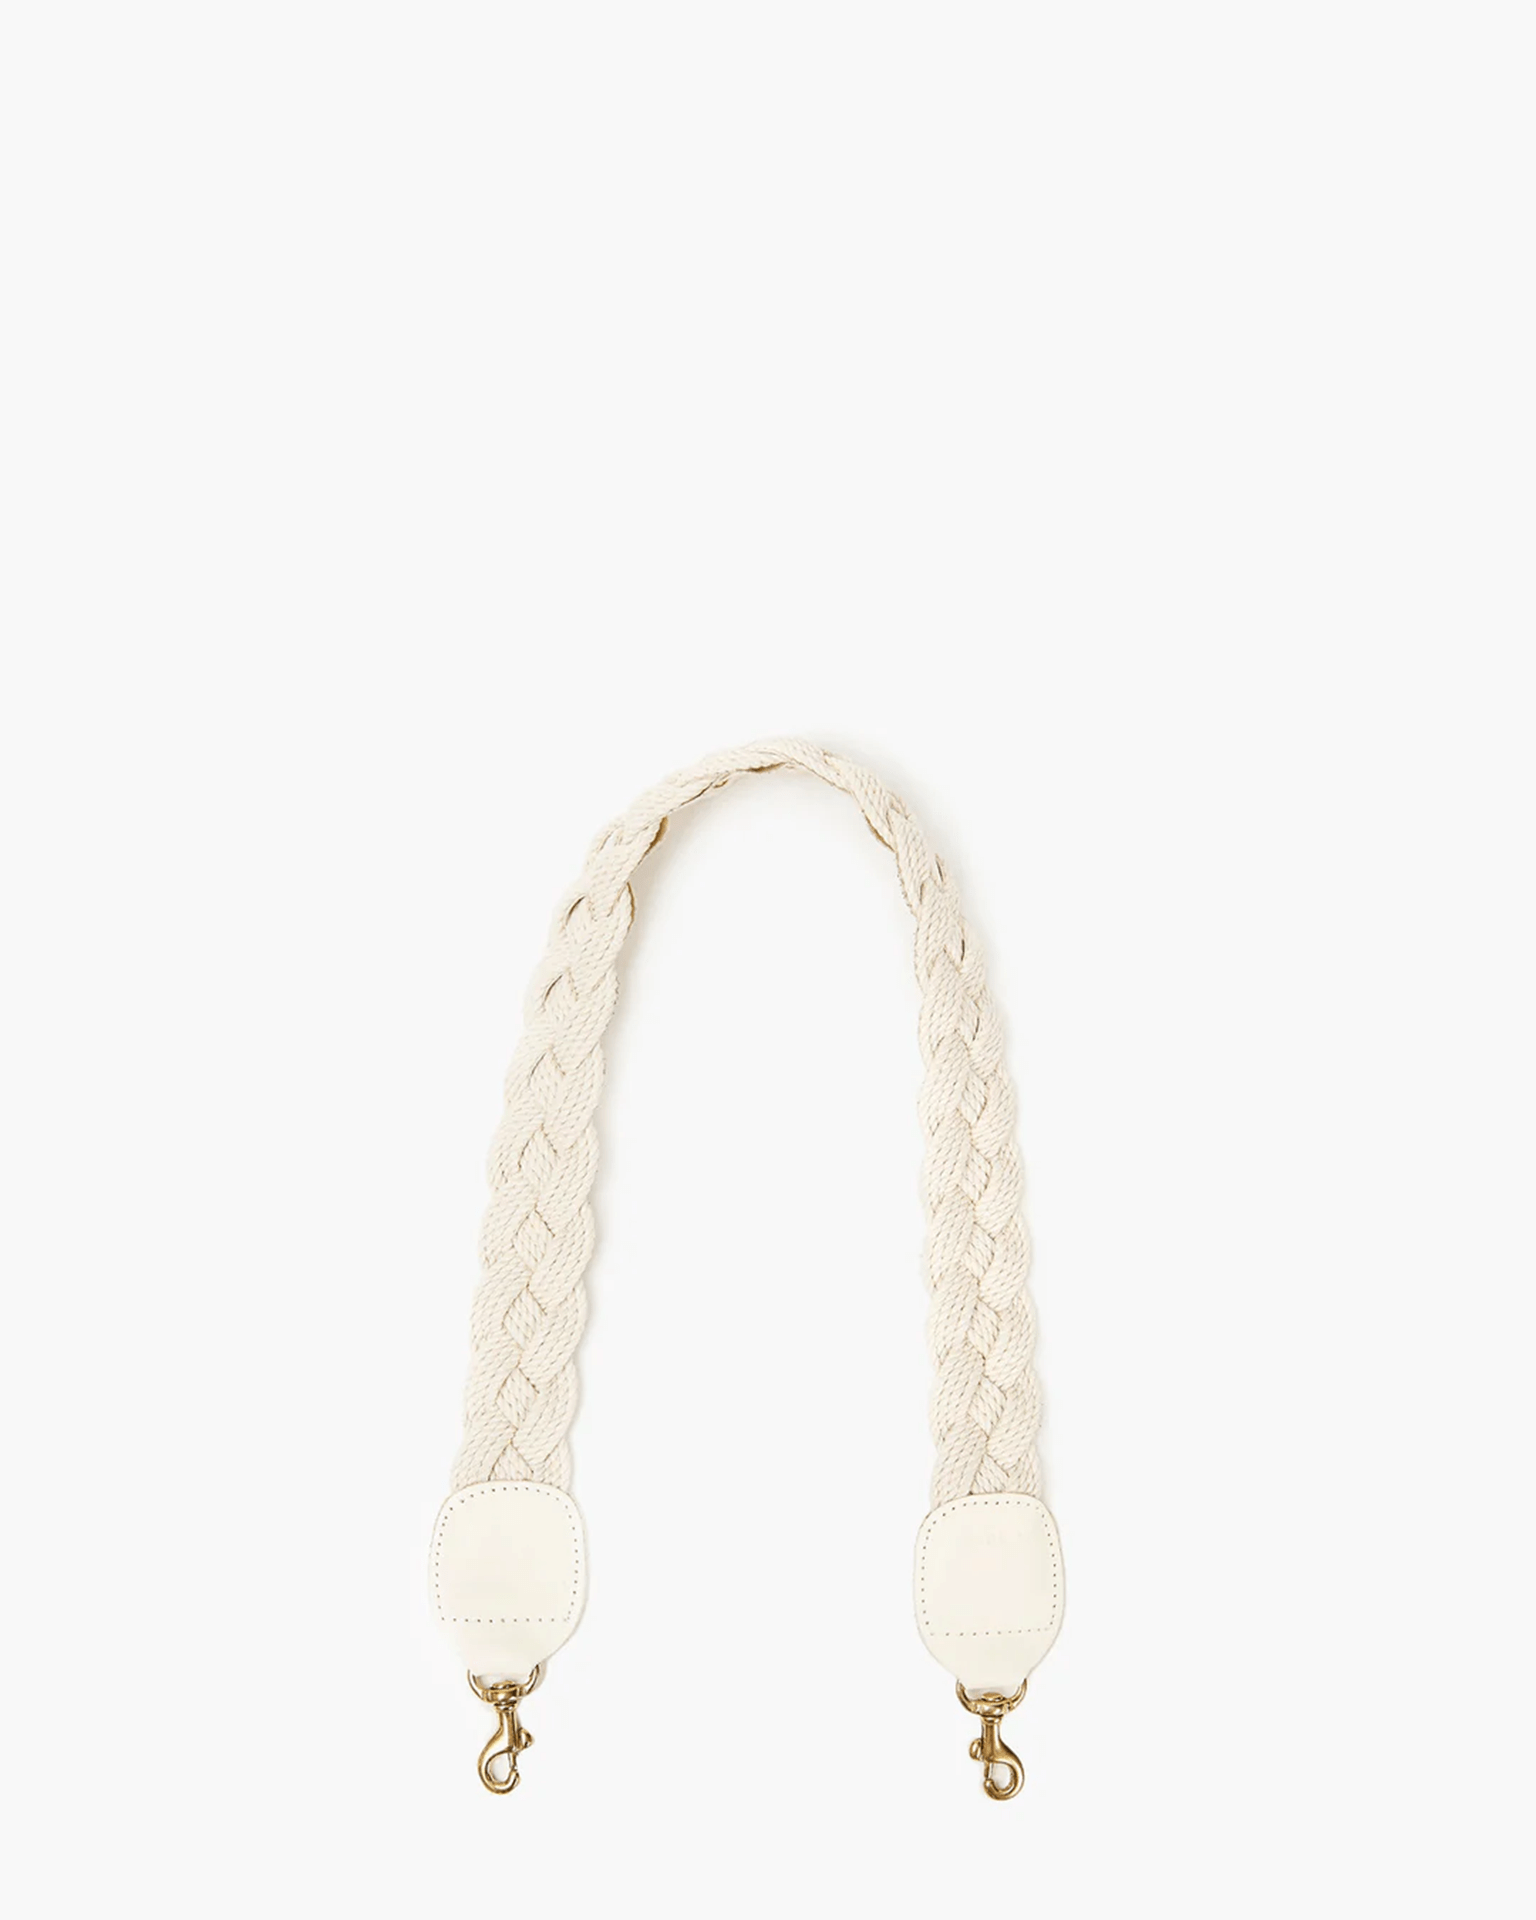 Clare V. Braided Rope Shoulder Strap in Cream w/ Ltr Tabs - Bliss